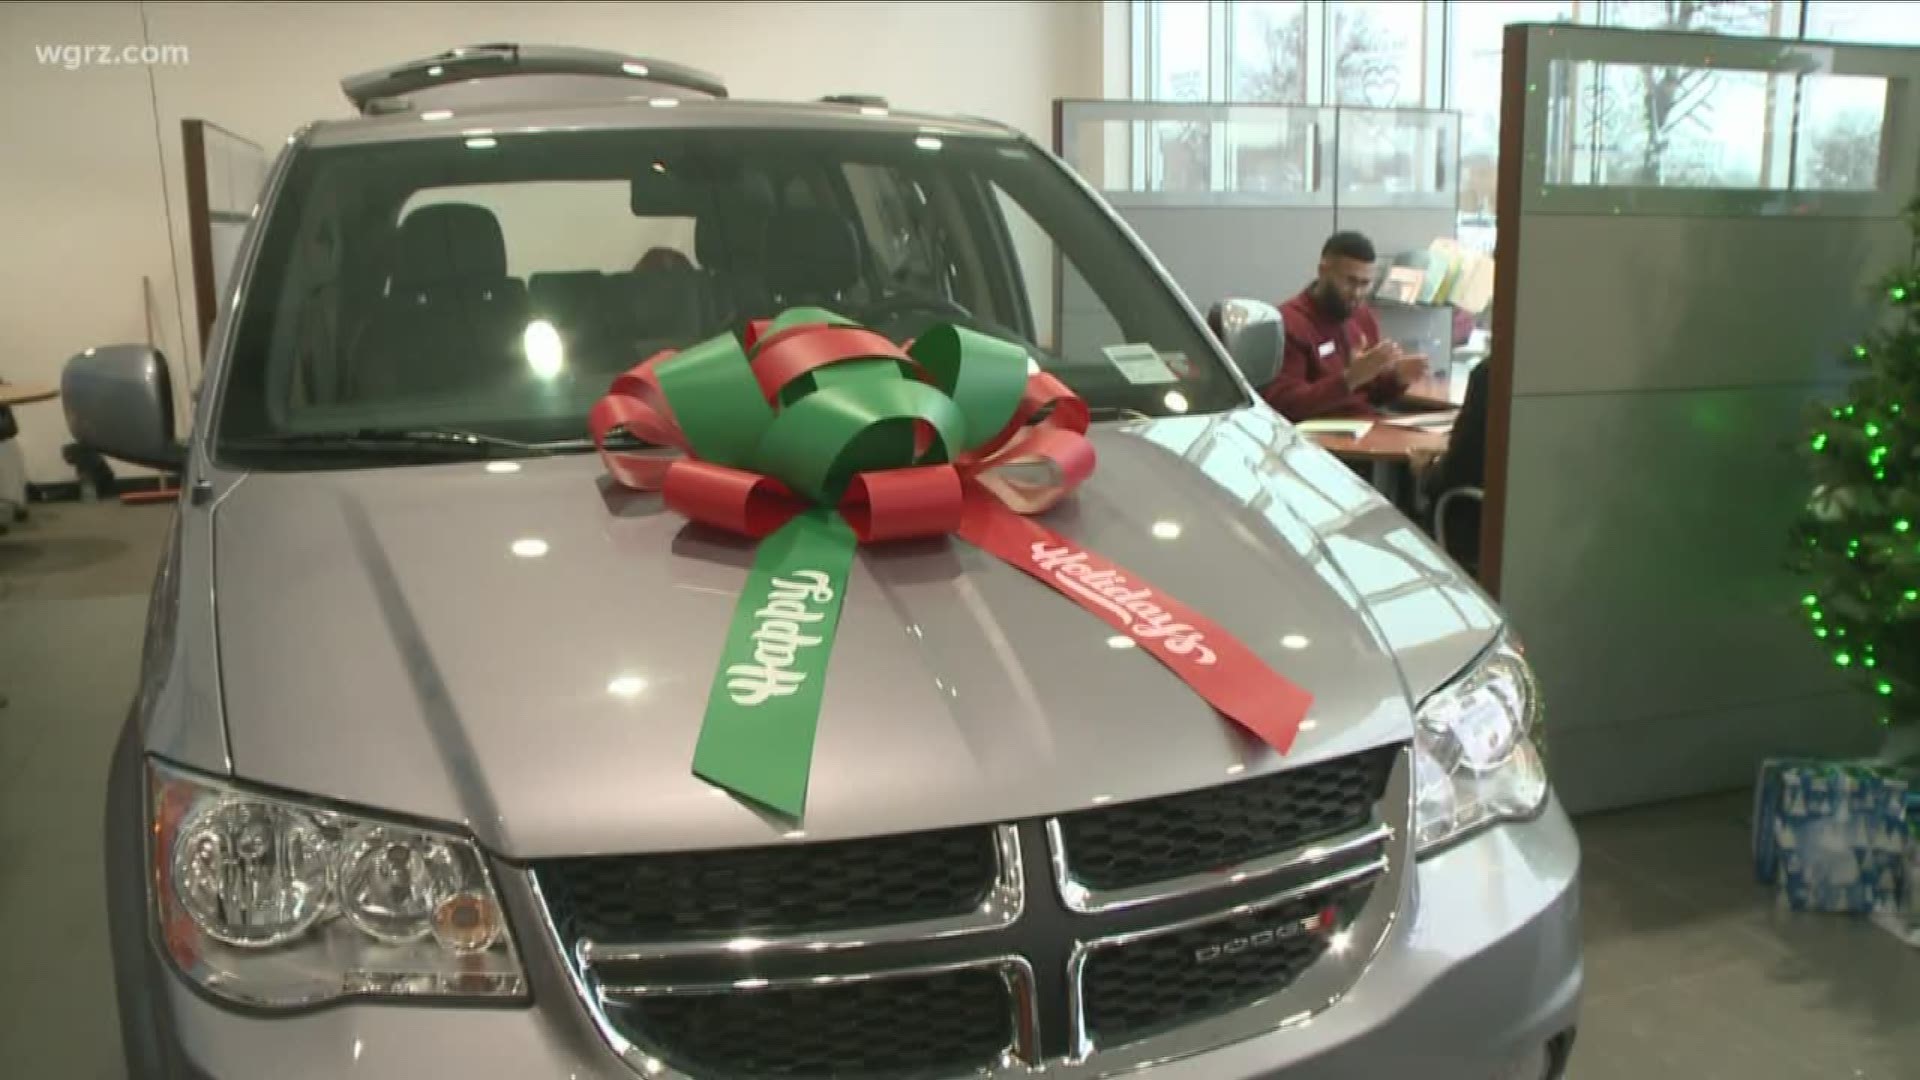 To help with the five children he recently adopted, Lamont Thomas was given a new minivan by a local dealership